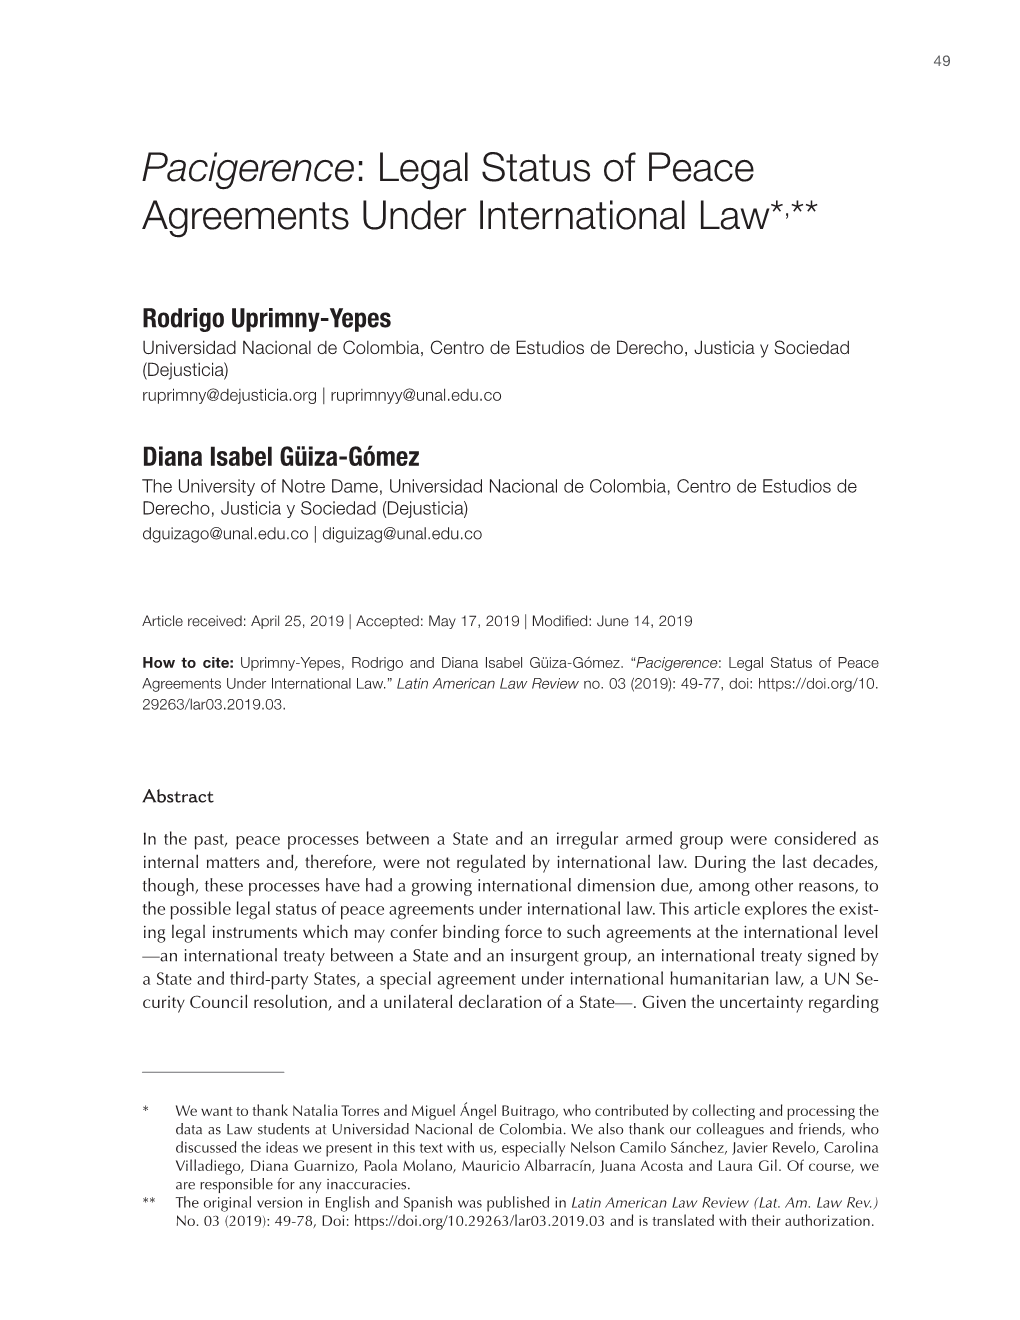 Pacigerence: Legal Status of Peace Agreements Under International Law*,**